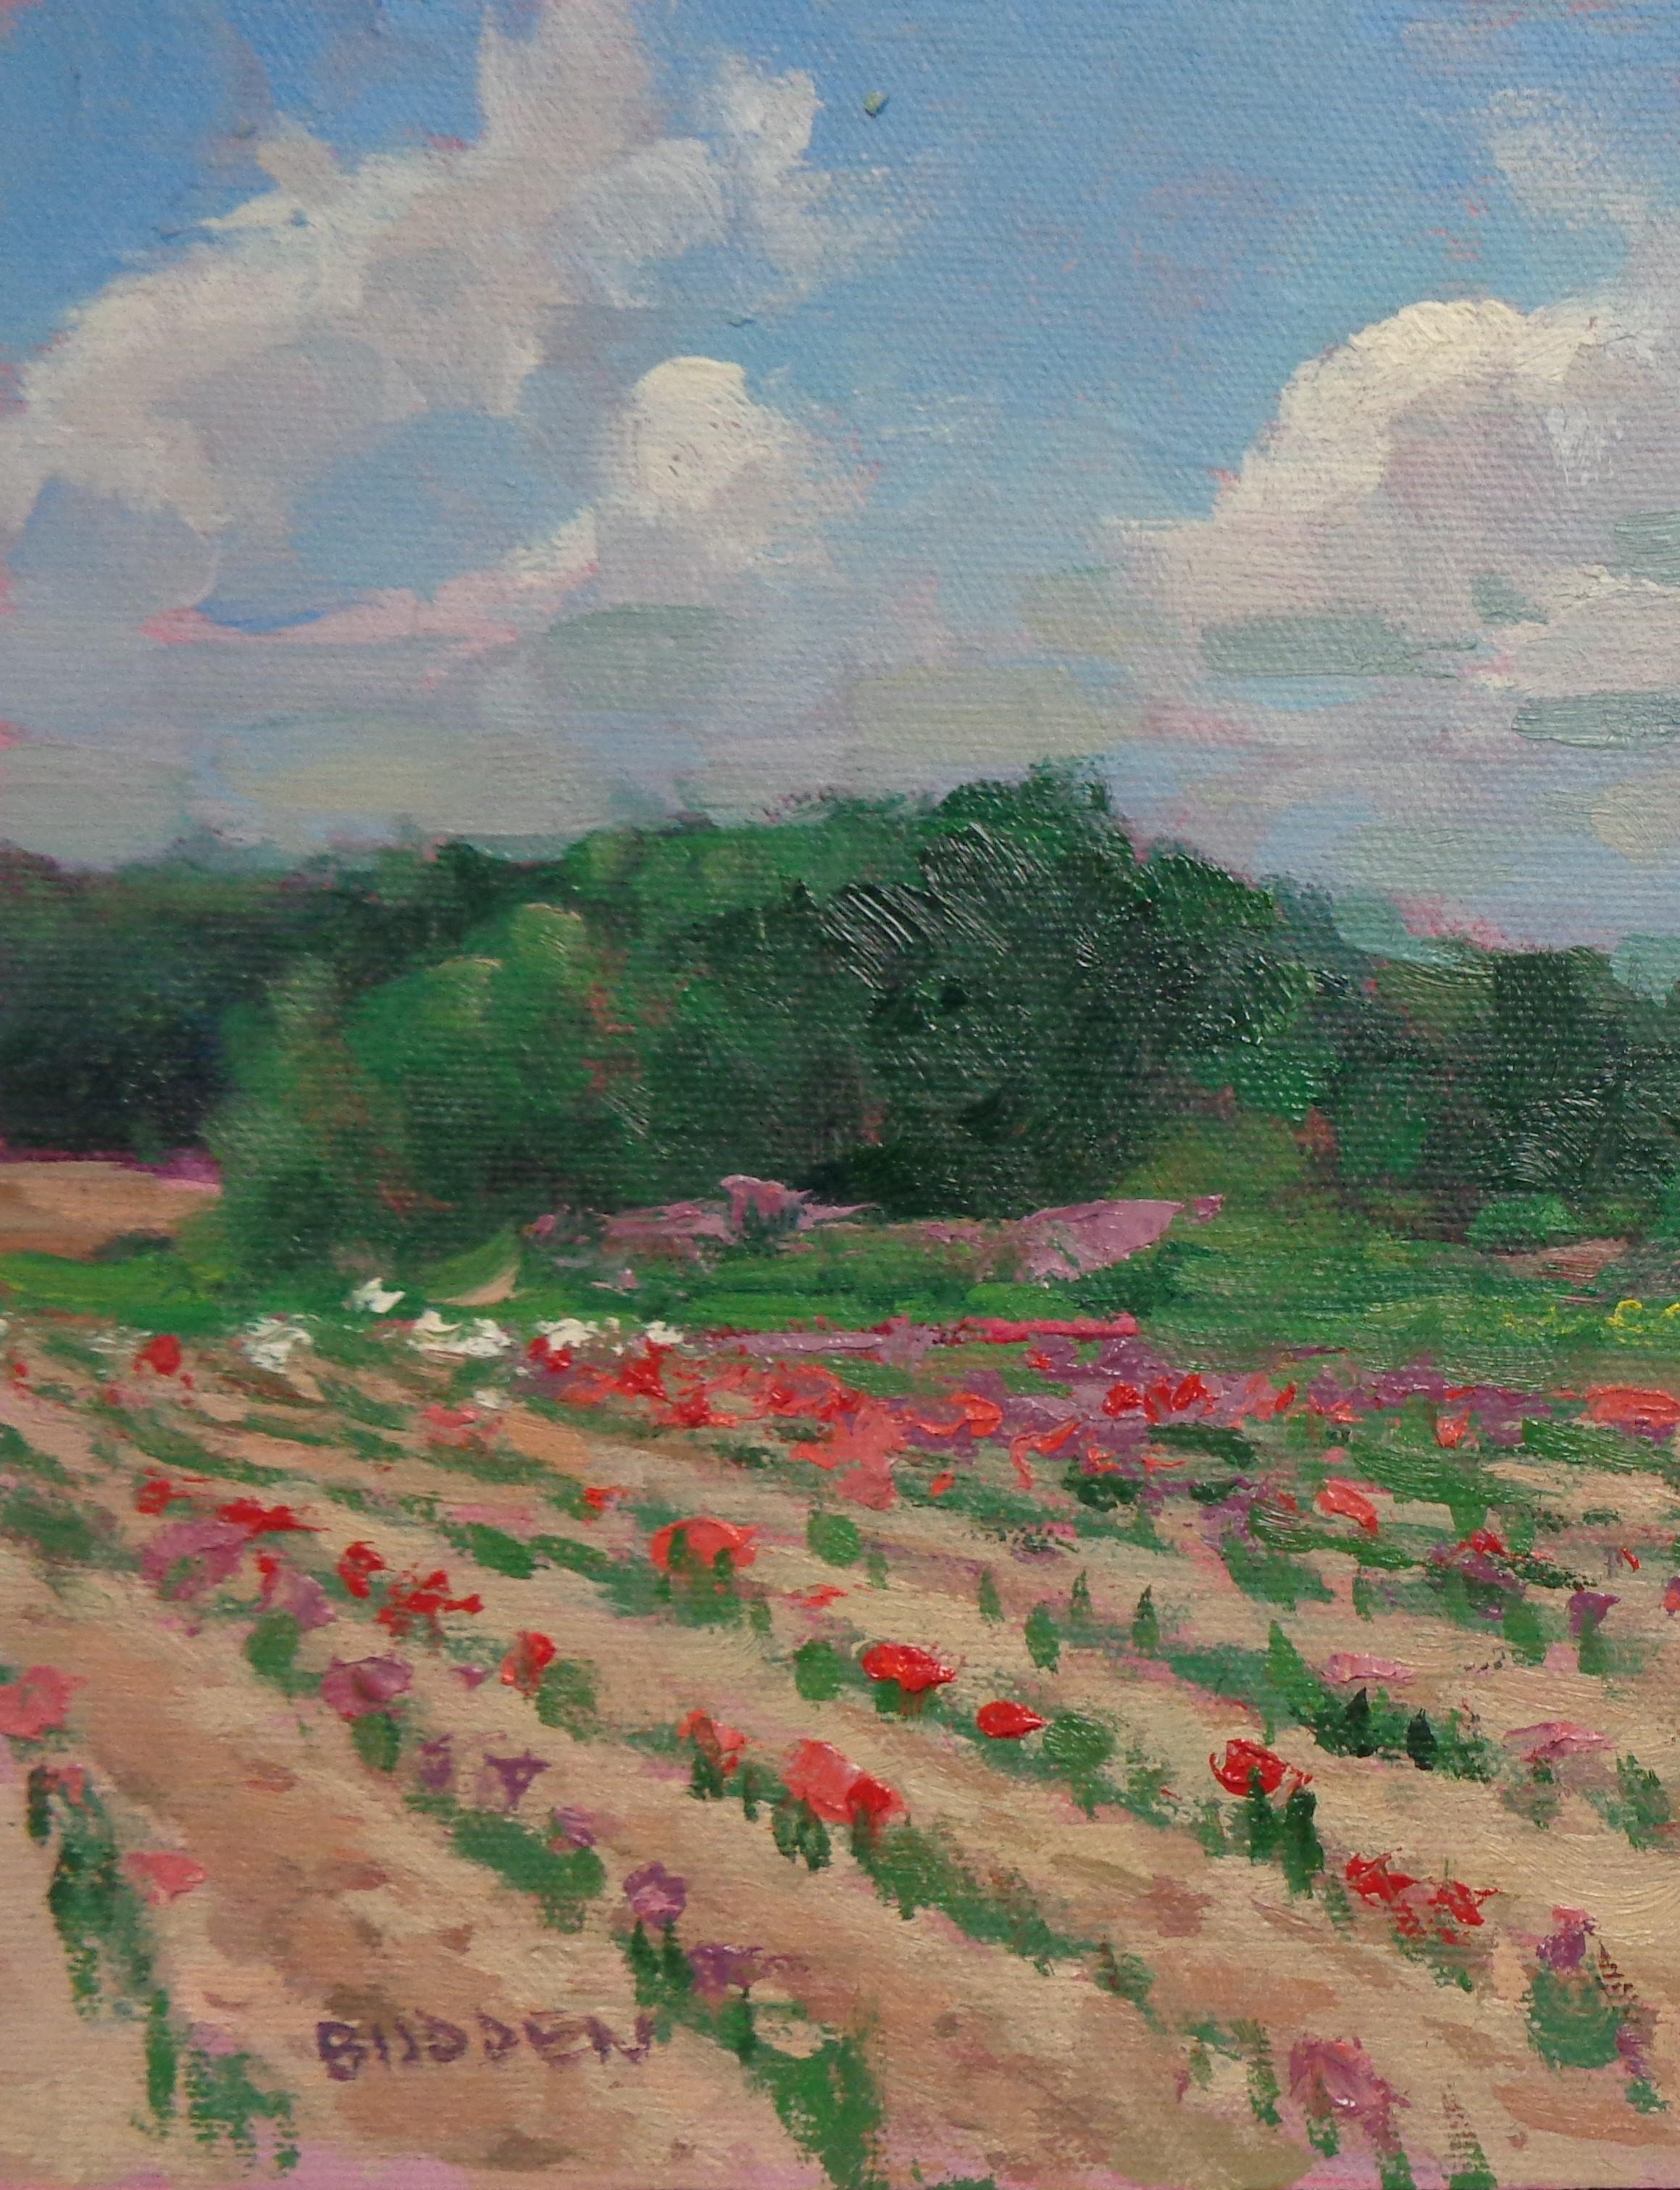  Impressionistic Landscape Oil Painting Michael Budden Early Spring Flower Farm For Sale 1